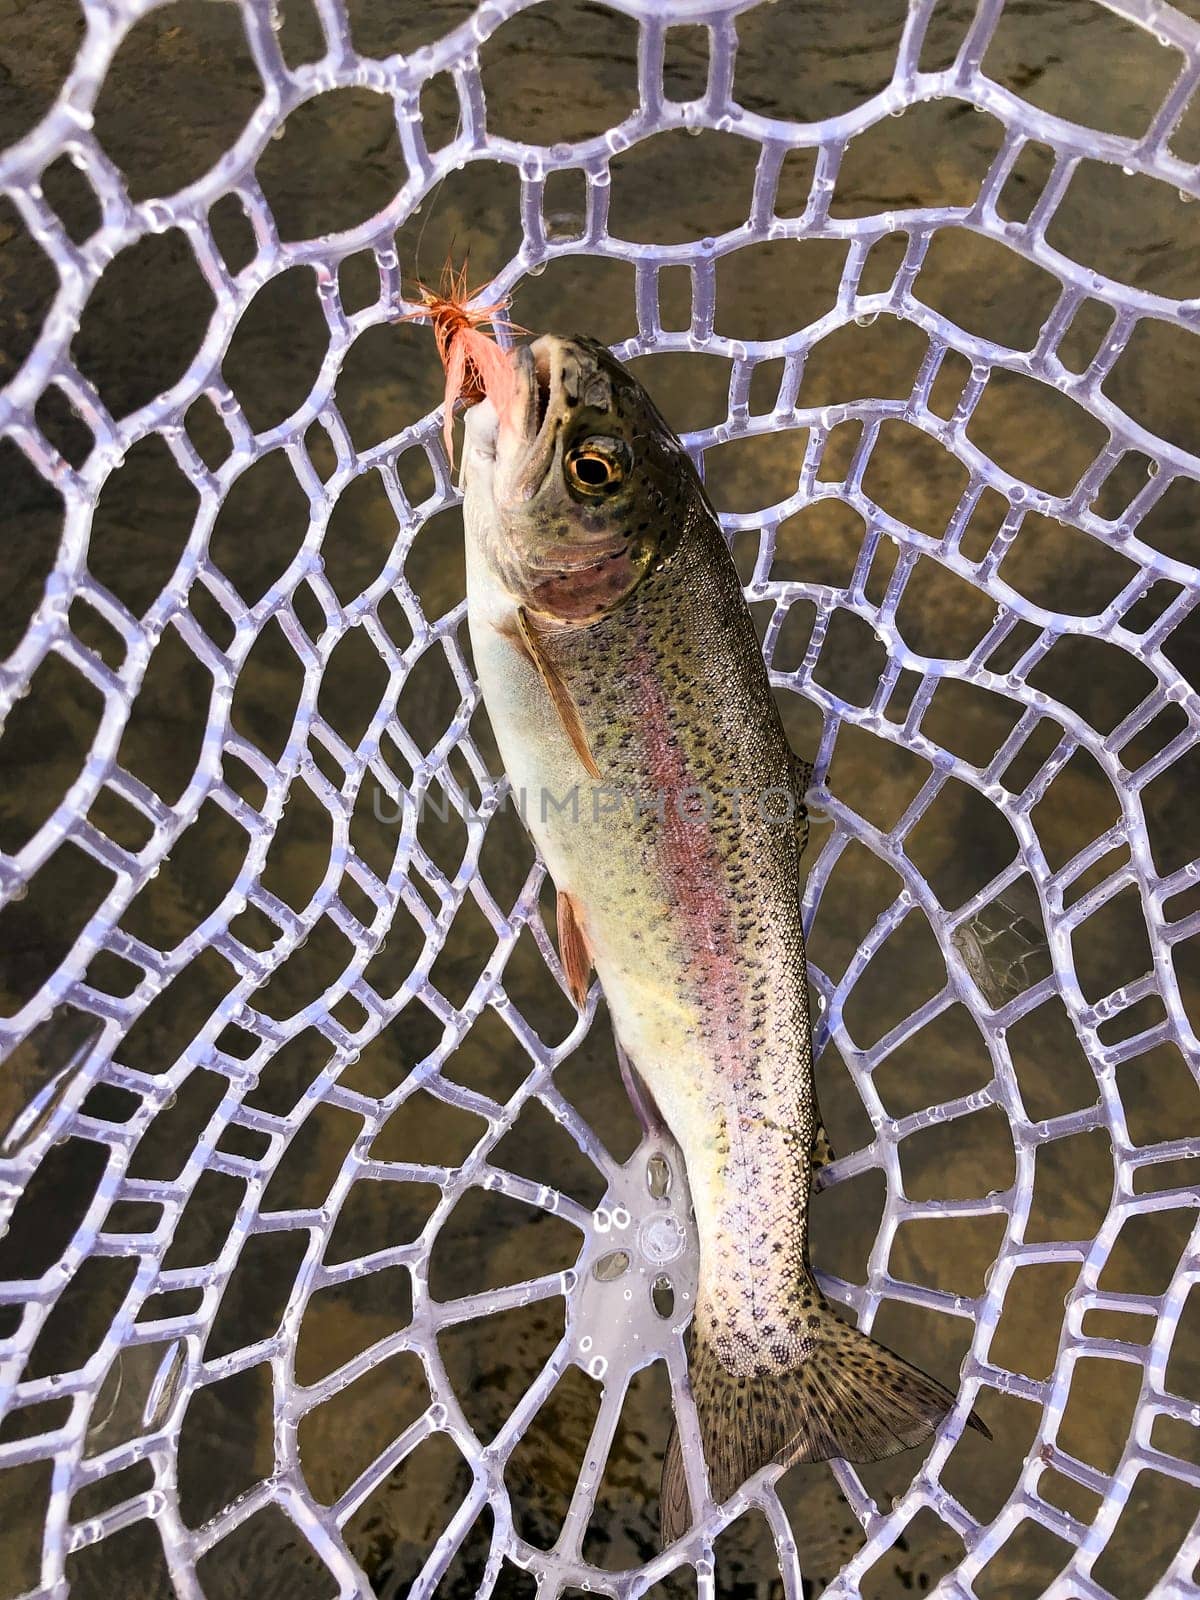 Catch and release fly fishing a river in Oregon produced this native, wild Redband Rainbow Trout seen here in a net with the fly still in its mouth.